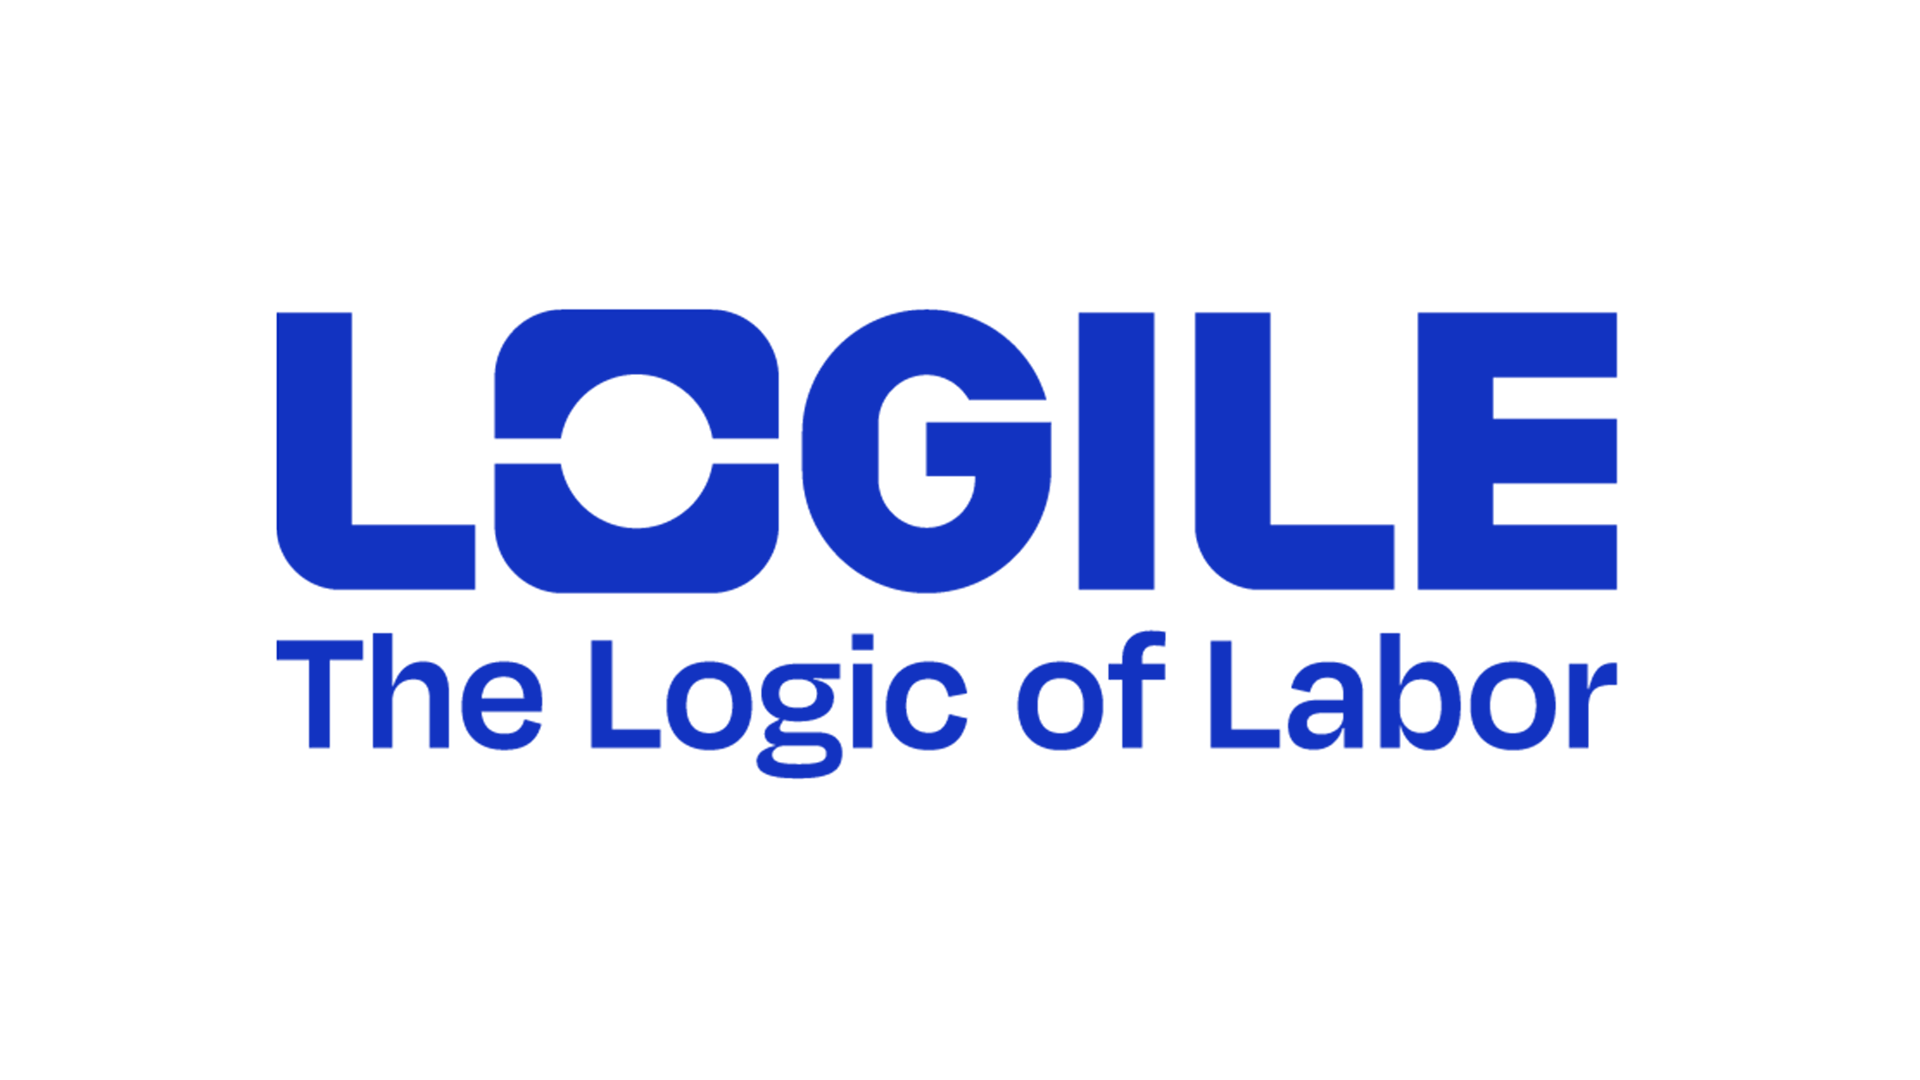 Logile Signs Largest Contract in Company History and Extends Global Reach With Multiple New Customers and Expanded Sales With Existing Customers – Logile